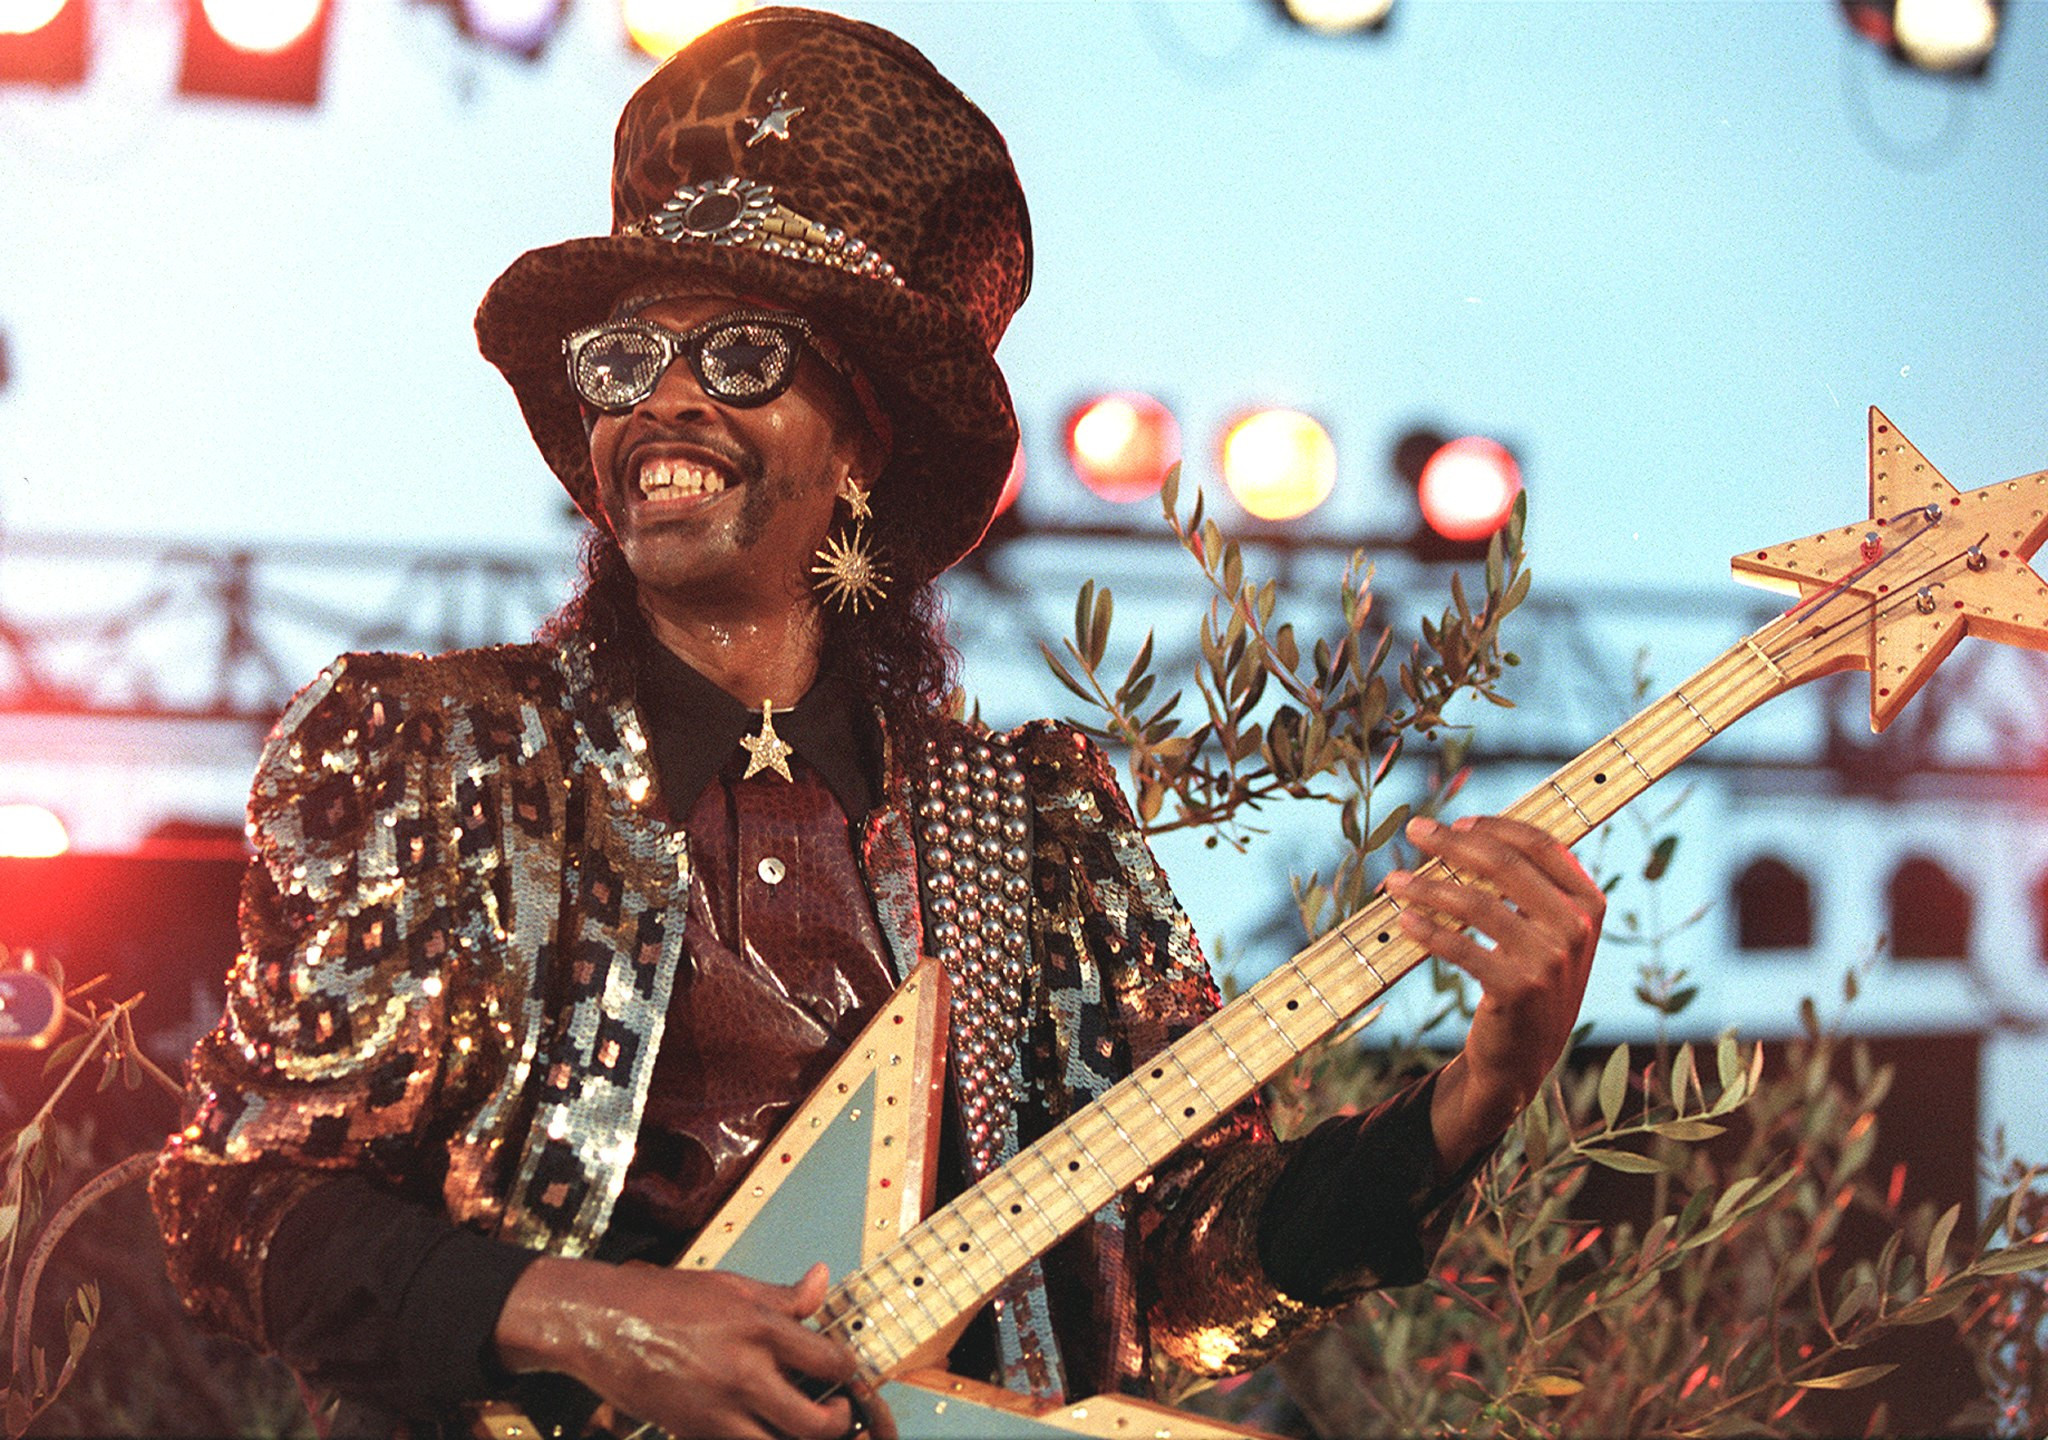 Rock and Roll Hall of Fame member Bootsy Collins will lead the opening and closing ceremonies © Getty Images